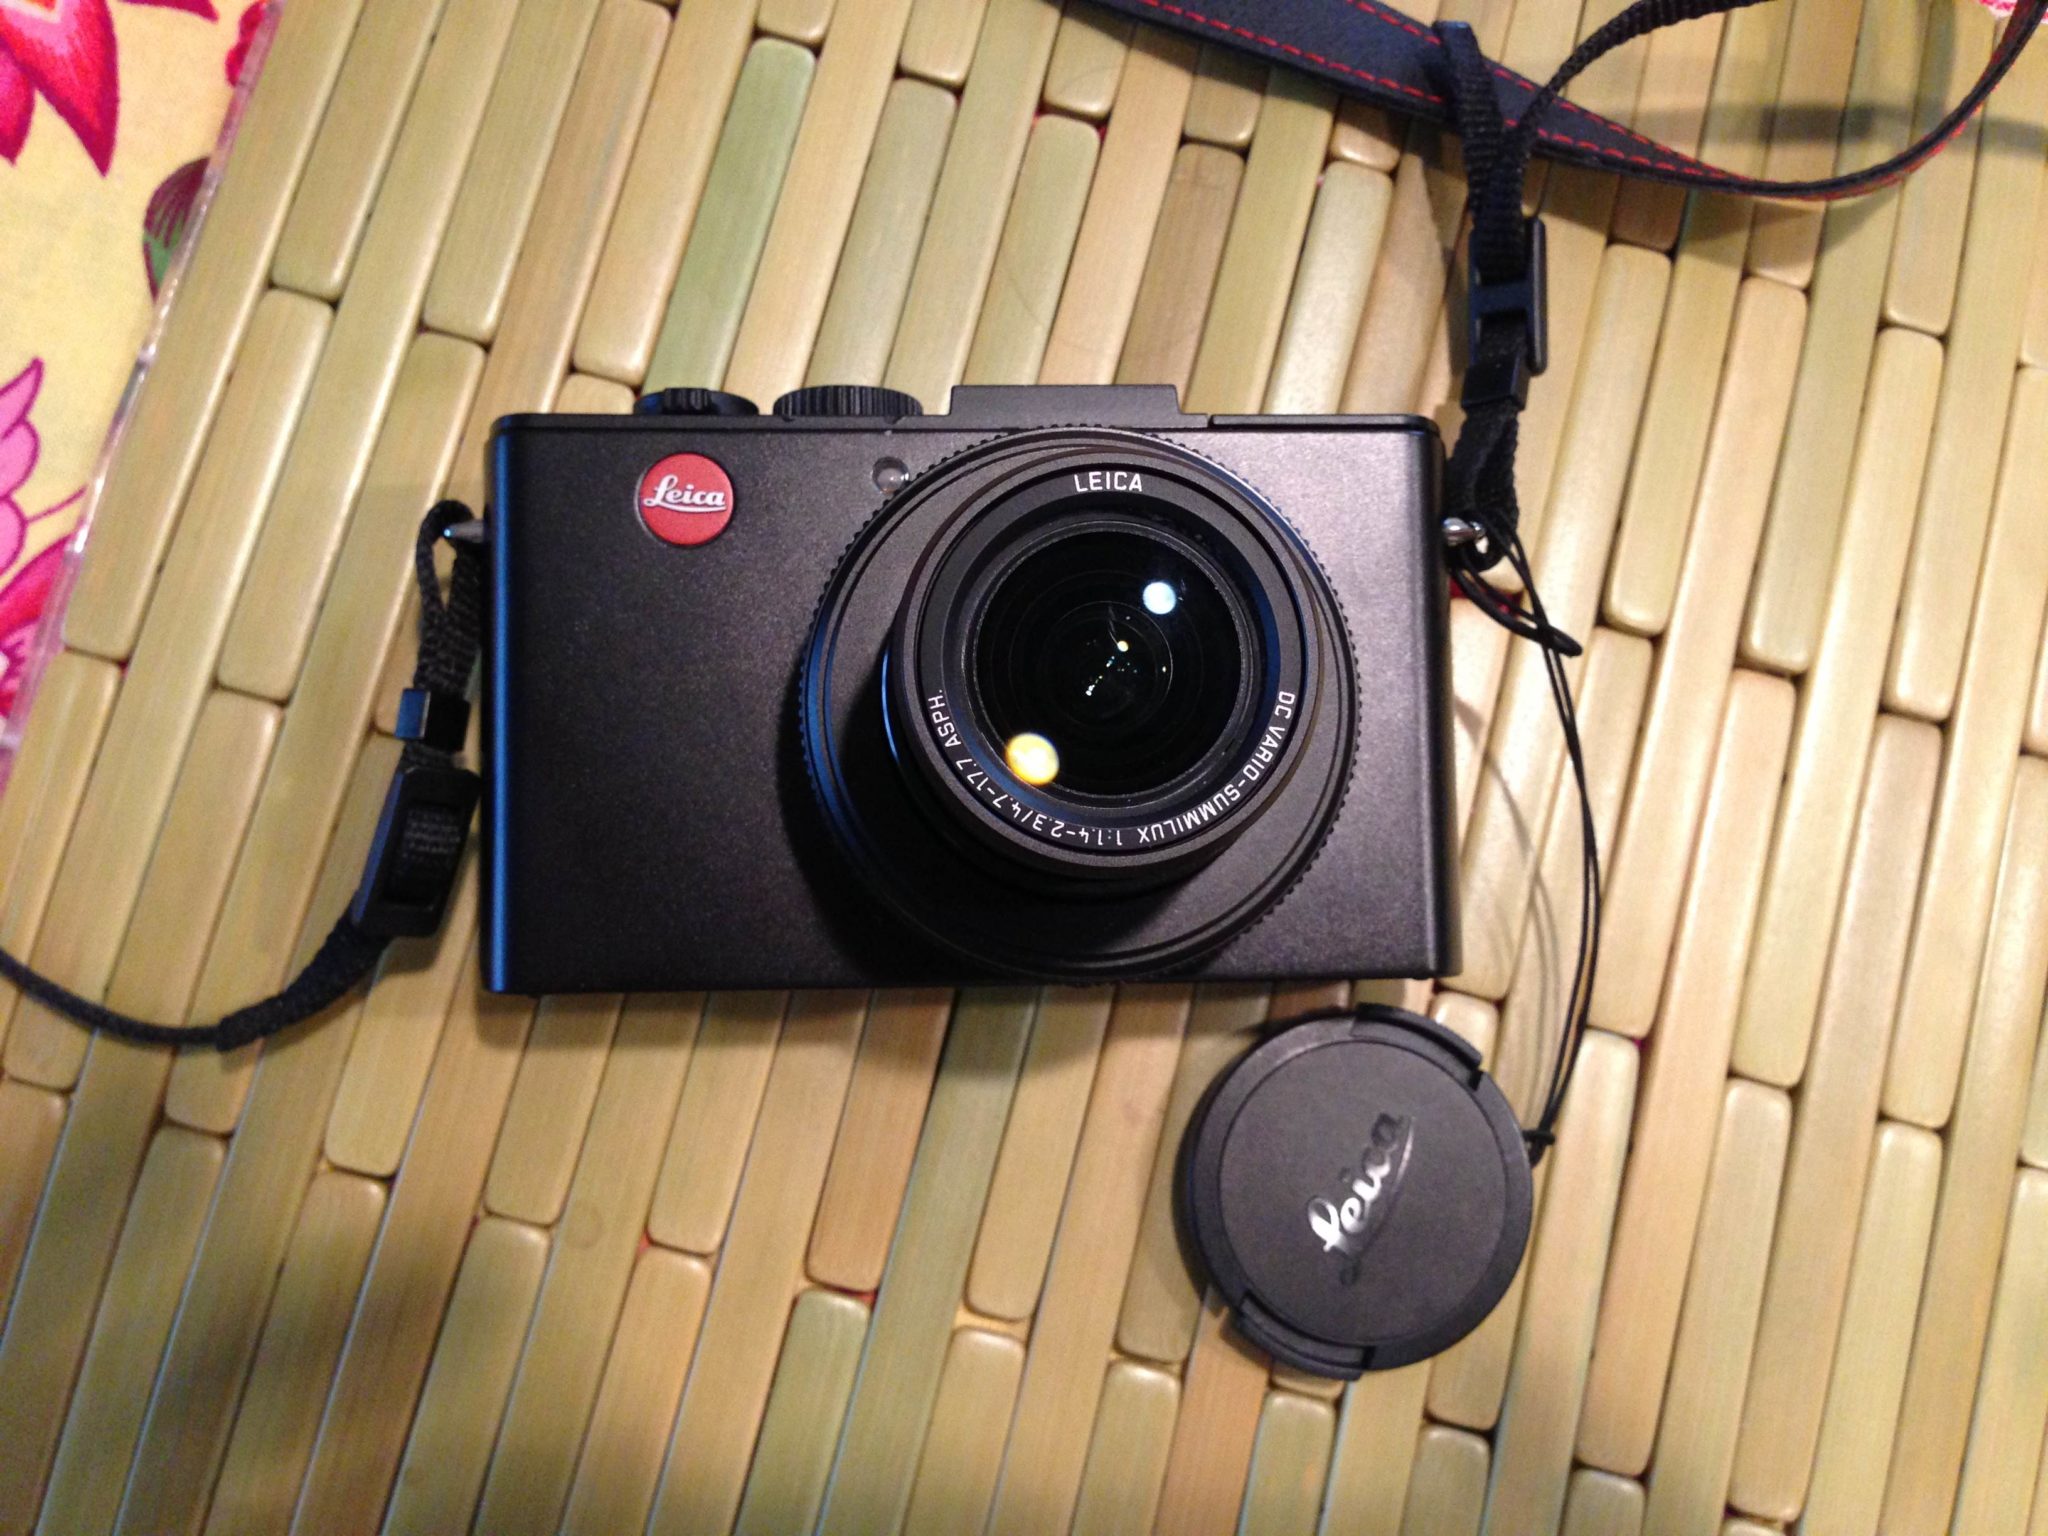 Leica D-Lux 6 Review